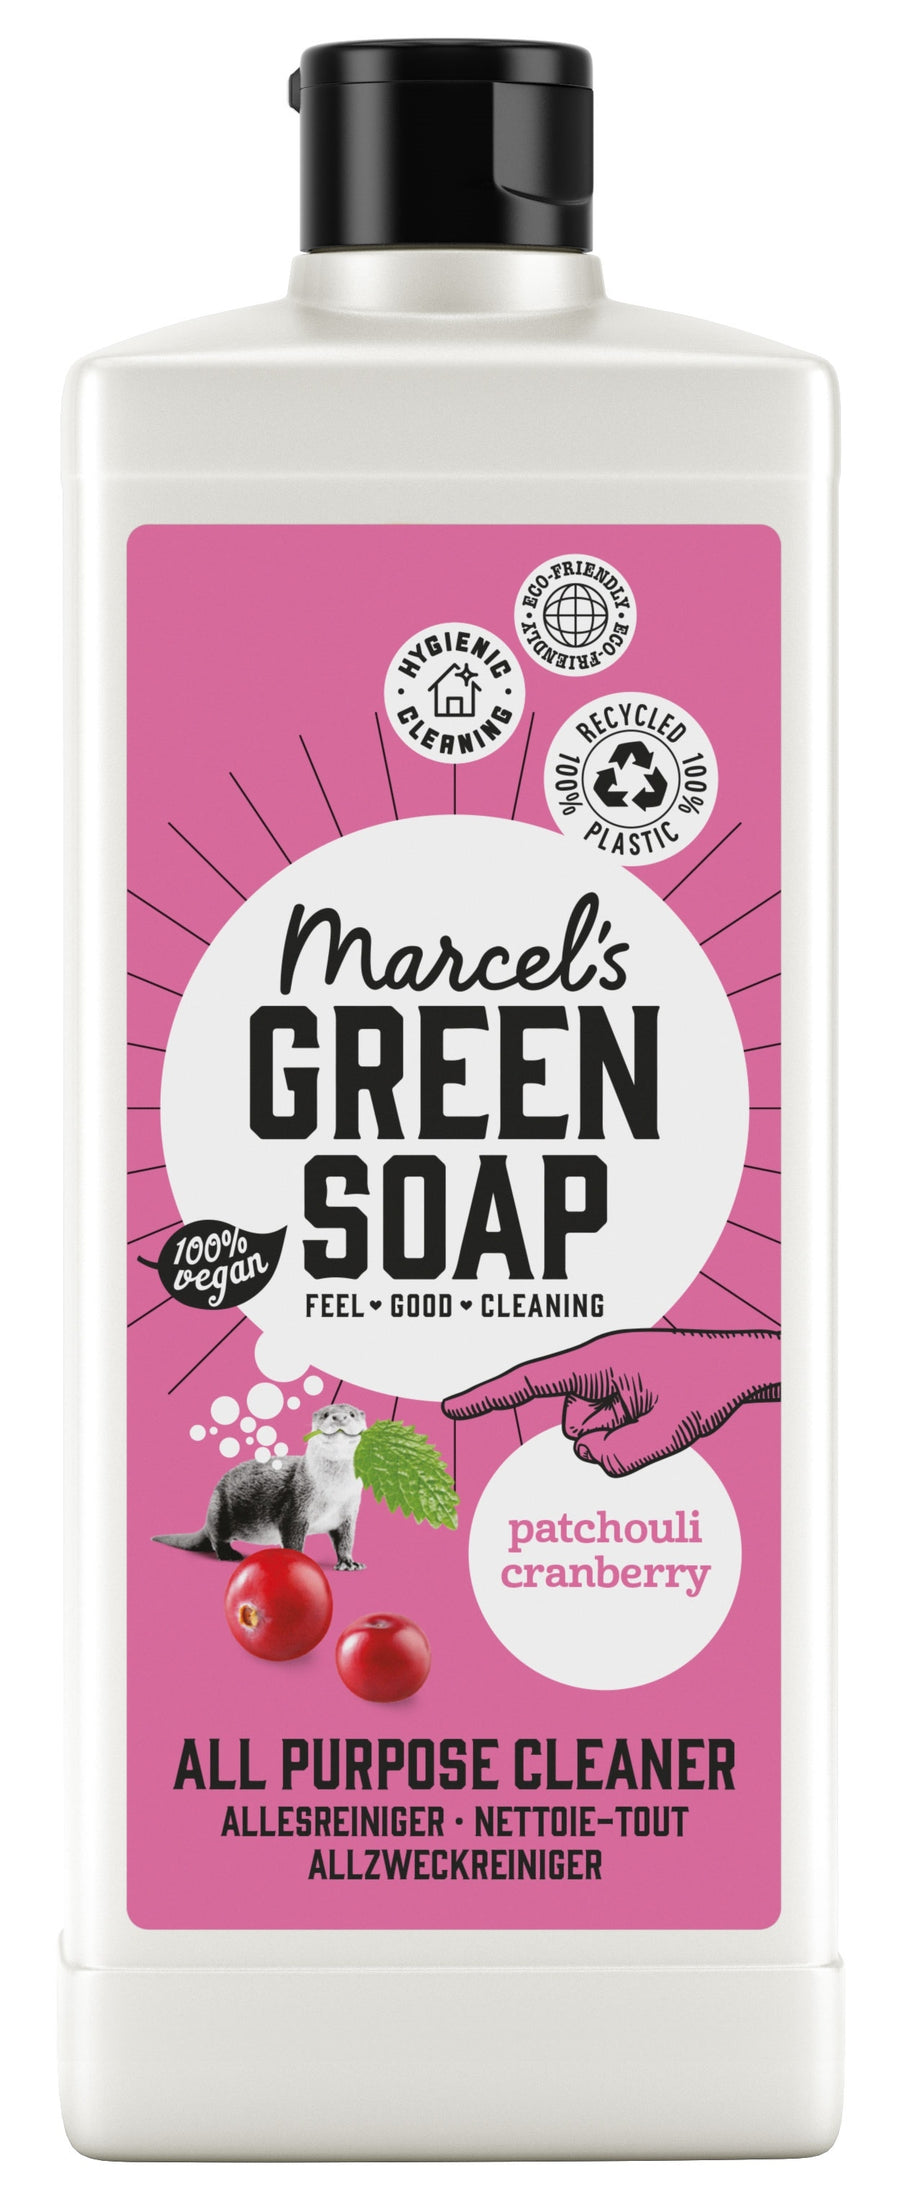 Marcel's Green Soap Patchouli & Cranberry All Purpose Cleaner 750ml